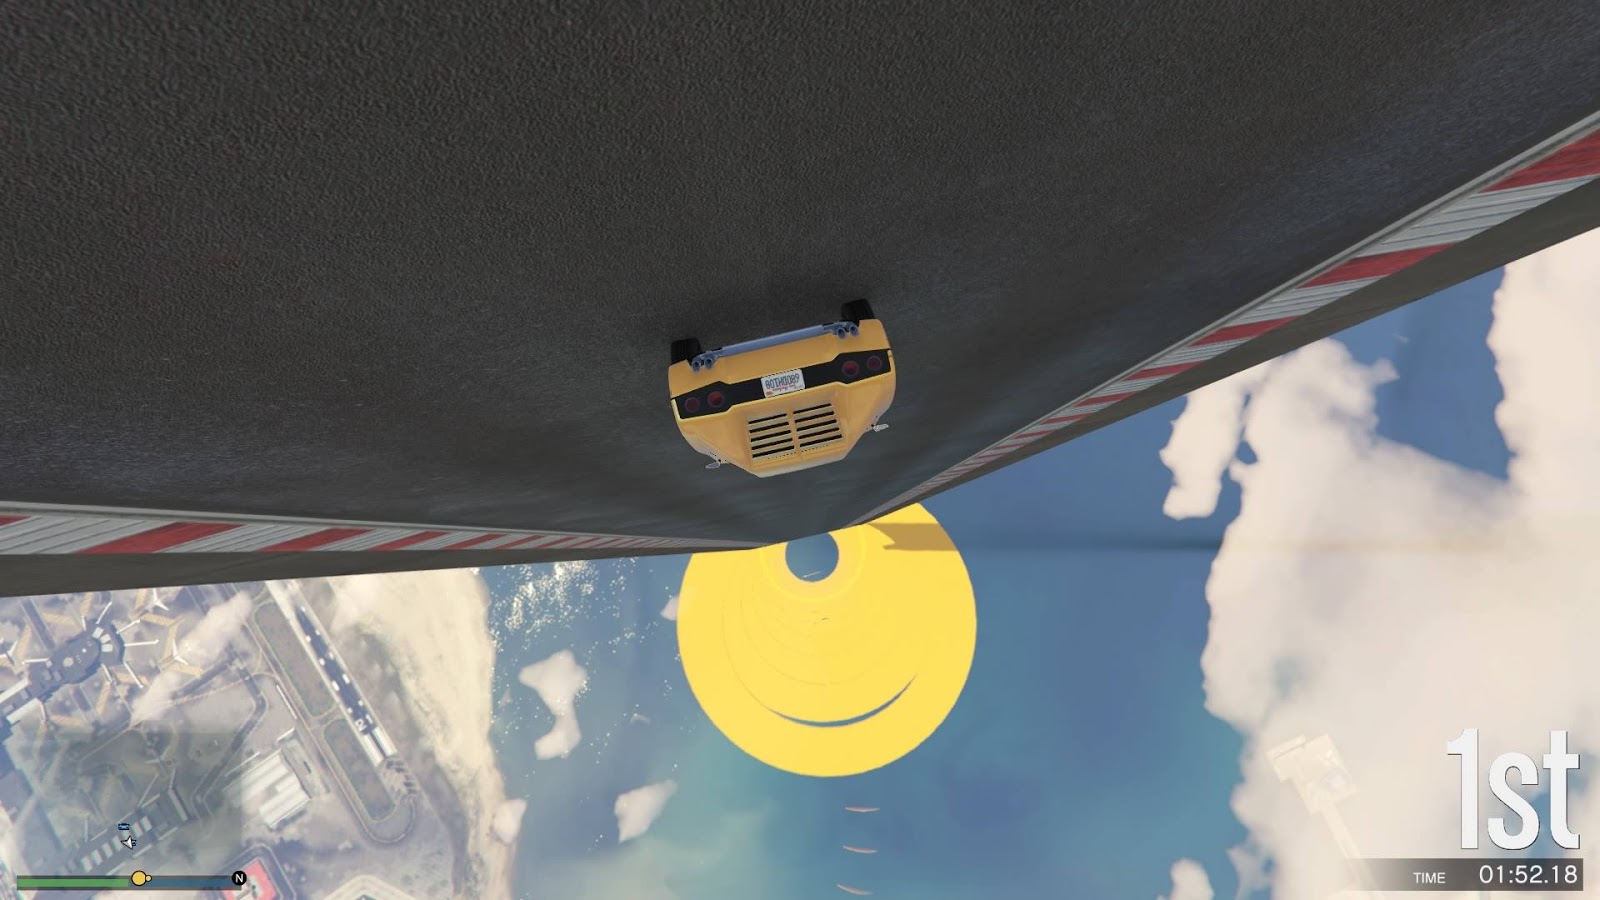 GTA Online’s New Modes Are More Creative Than You’d Expect